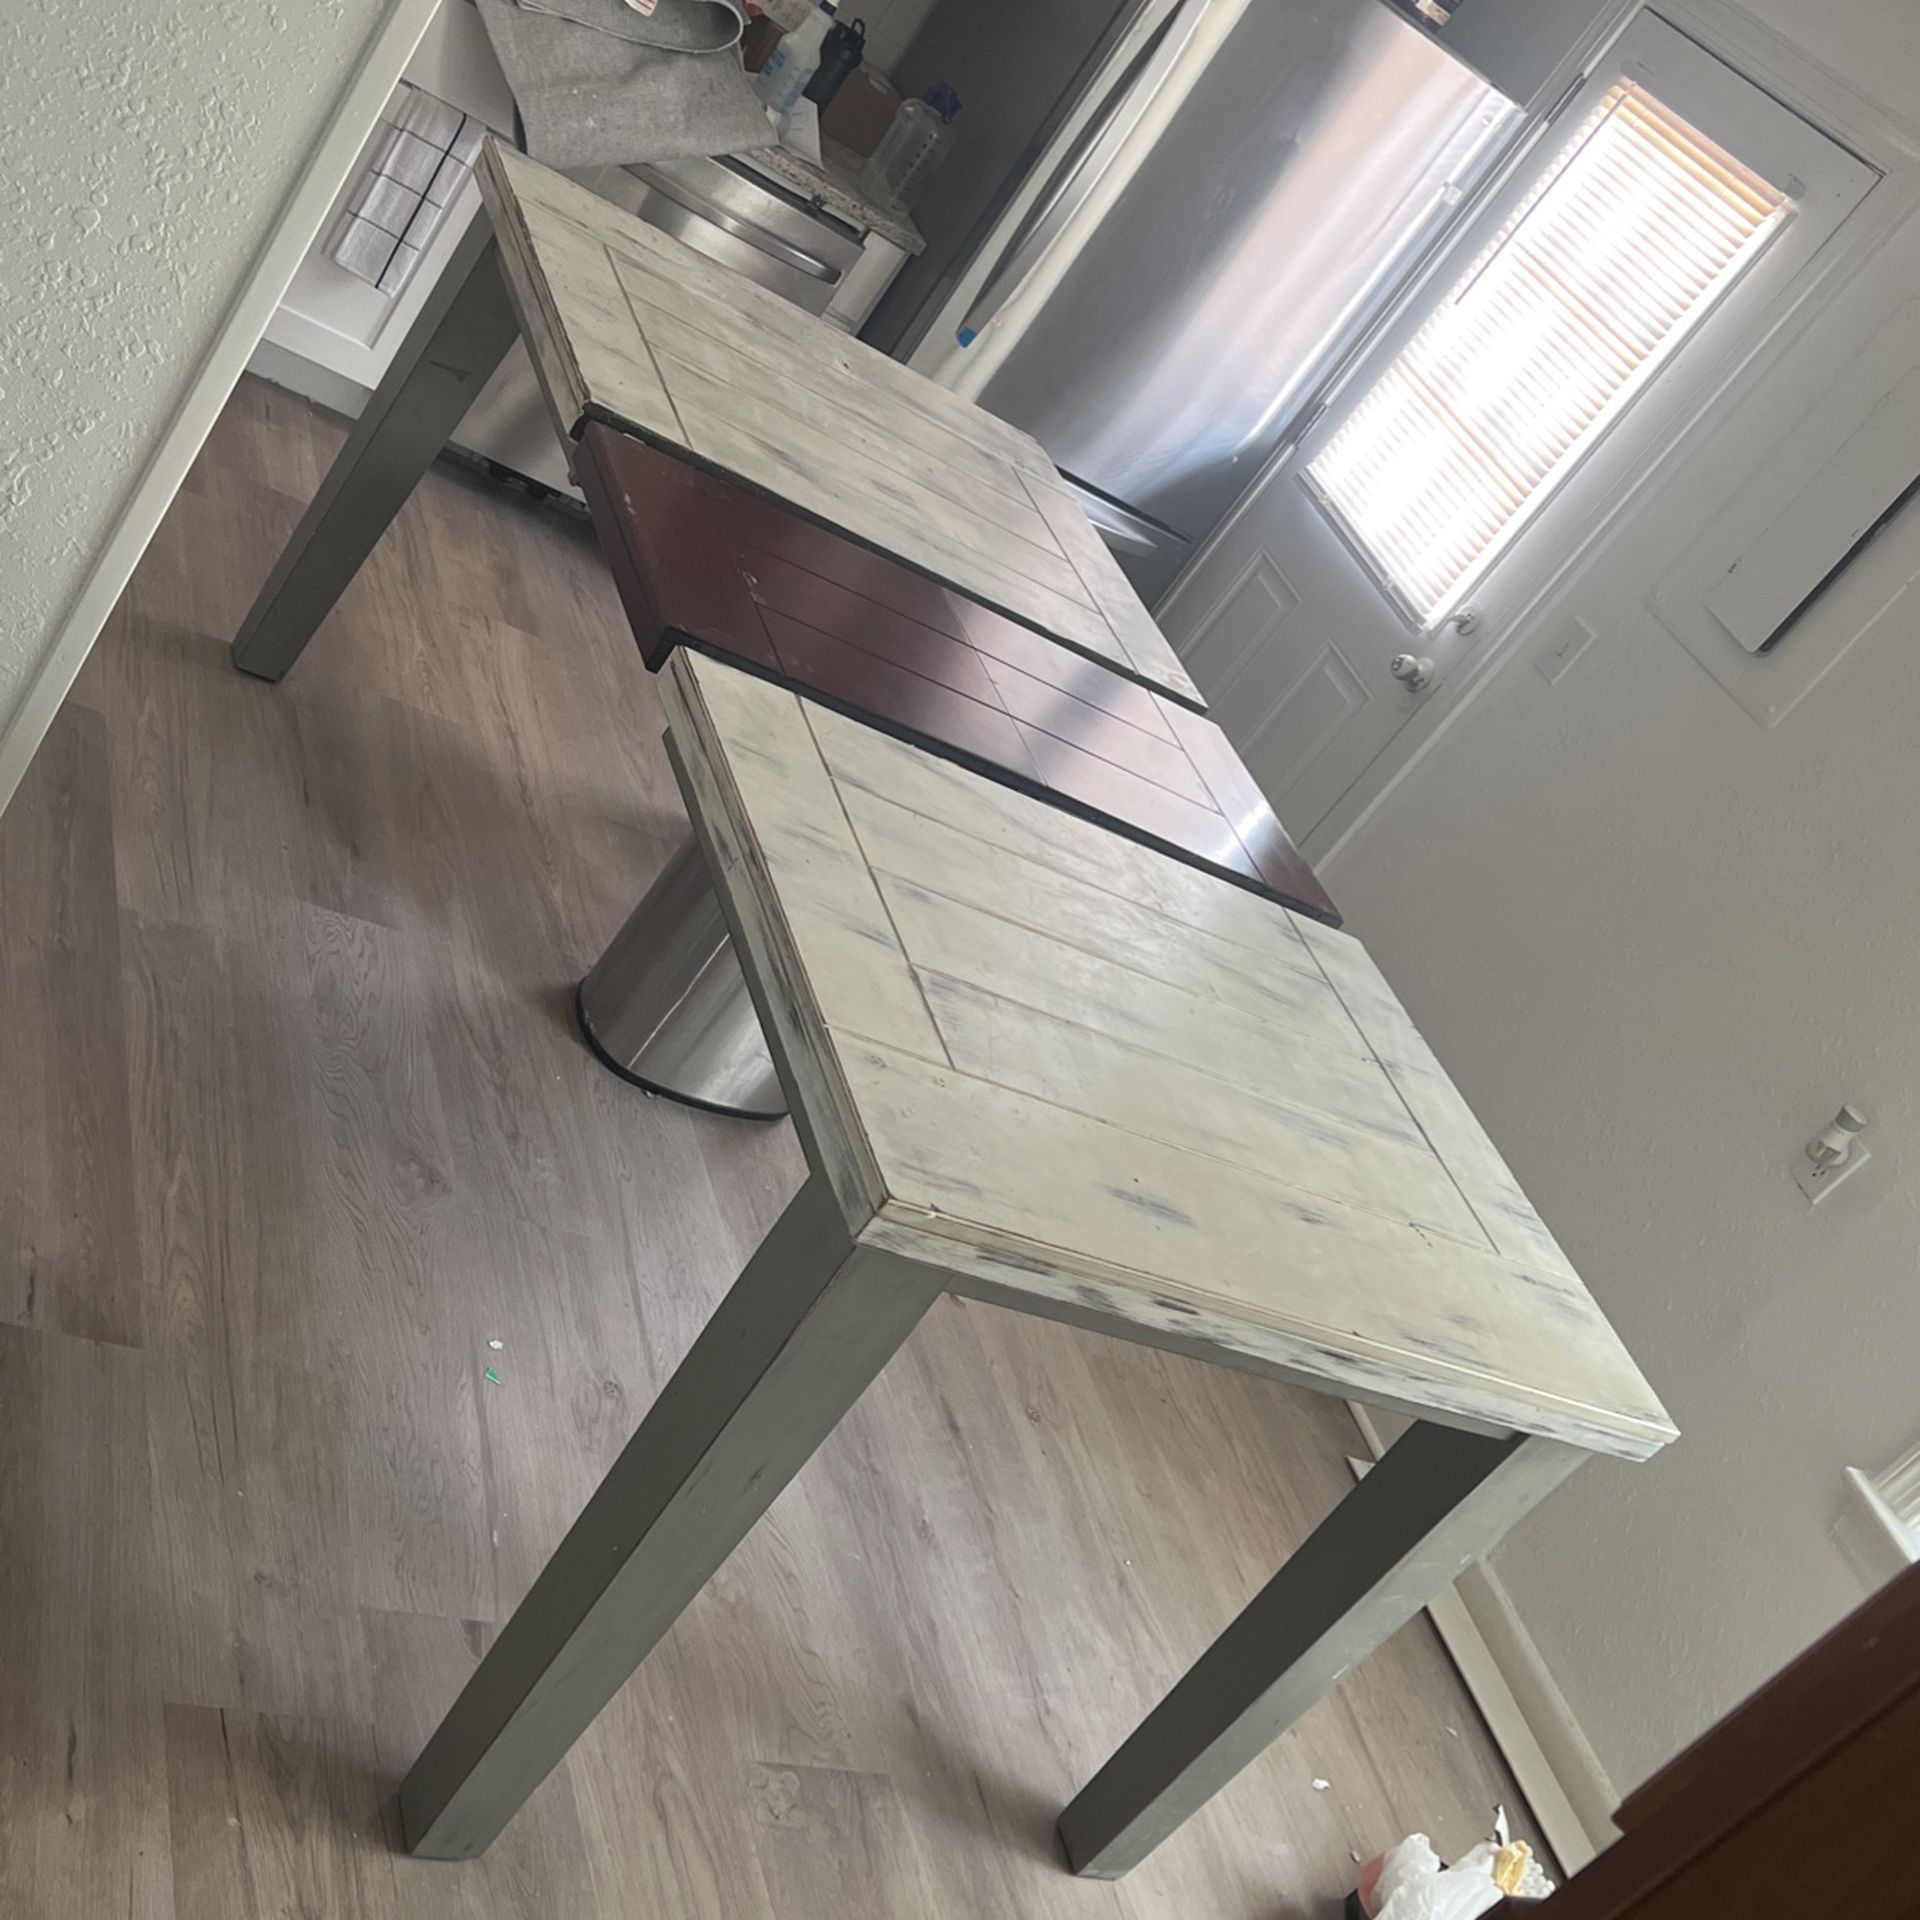 Collapsible/ Expandable Dining Room Table $150 OBO